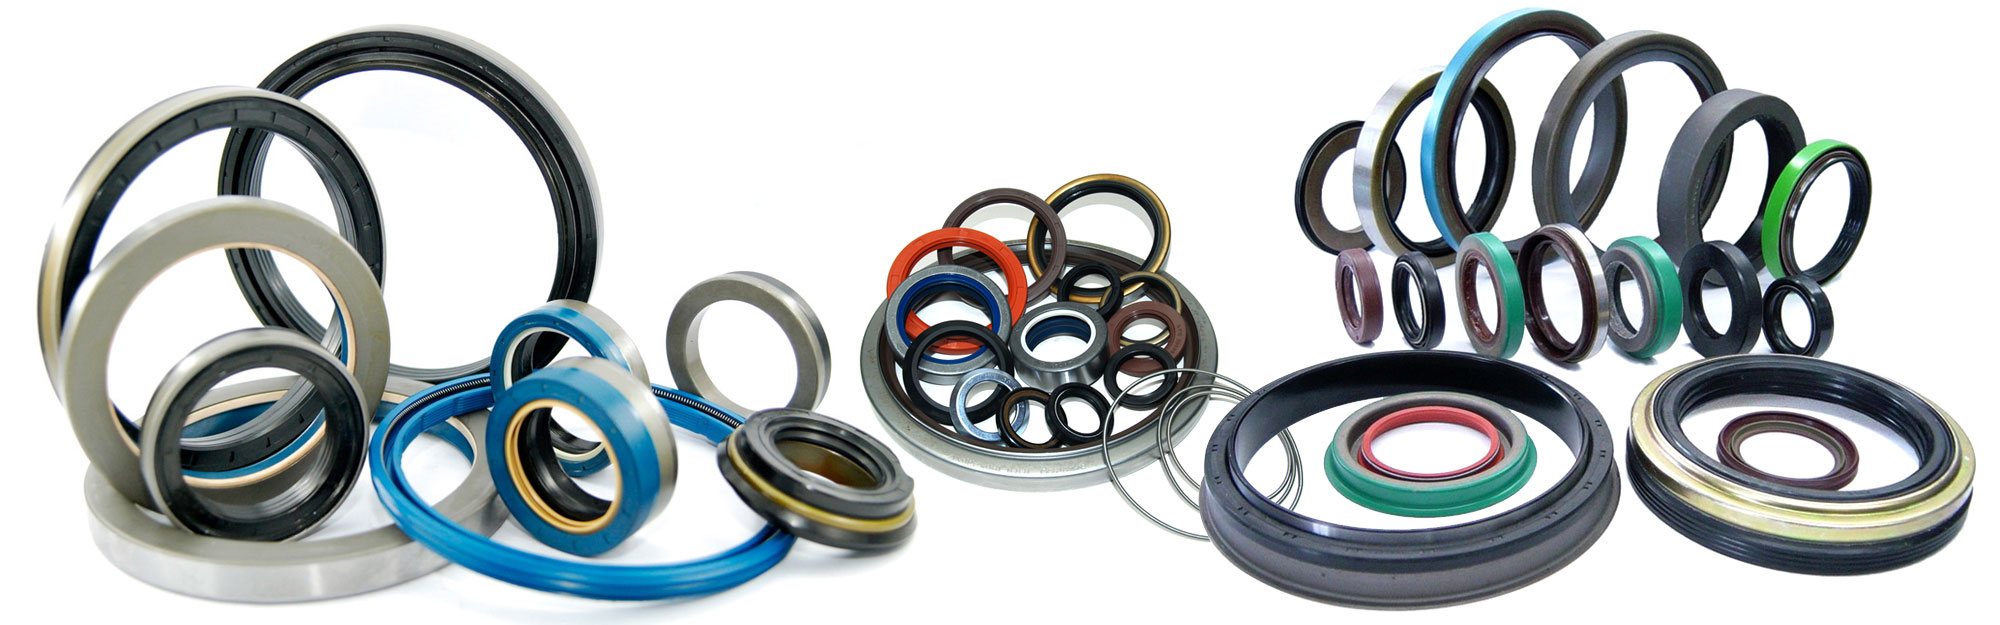 Oil seals | Manufacturers and Exporters, India